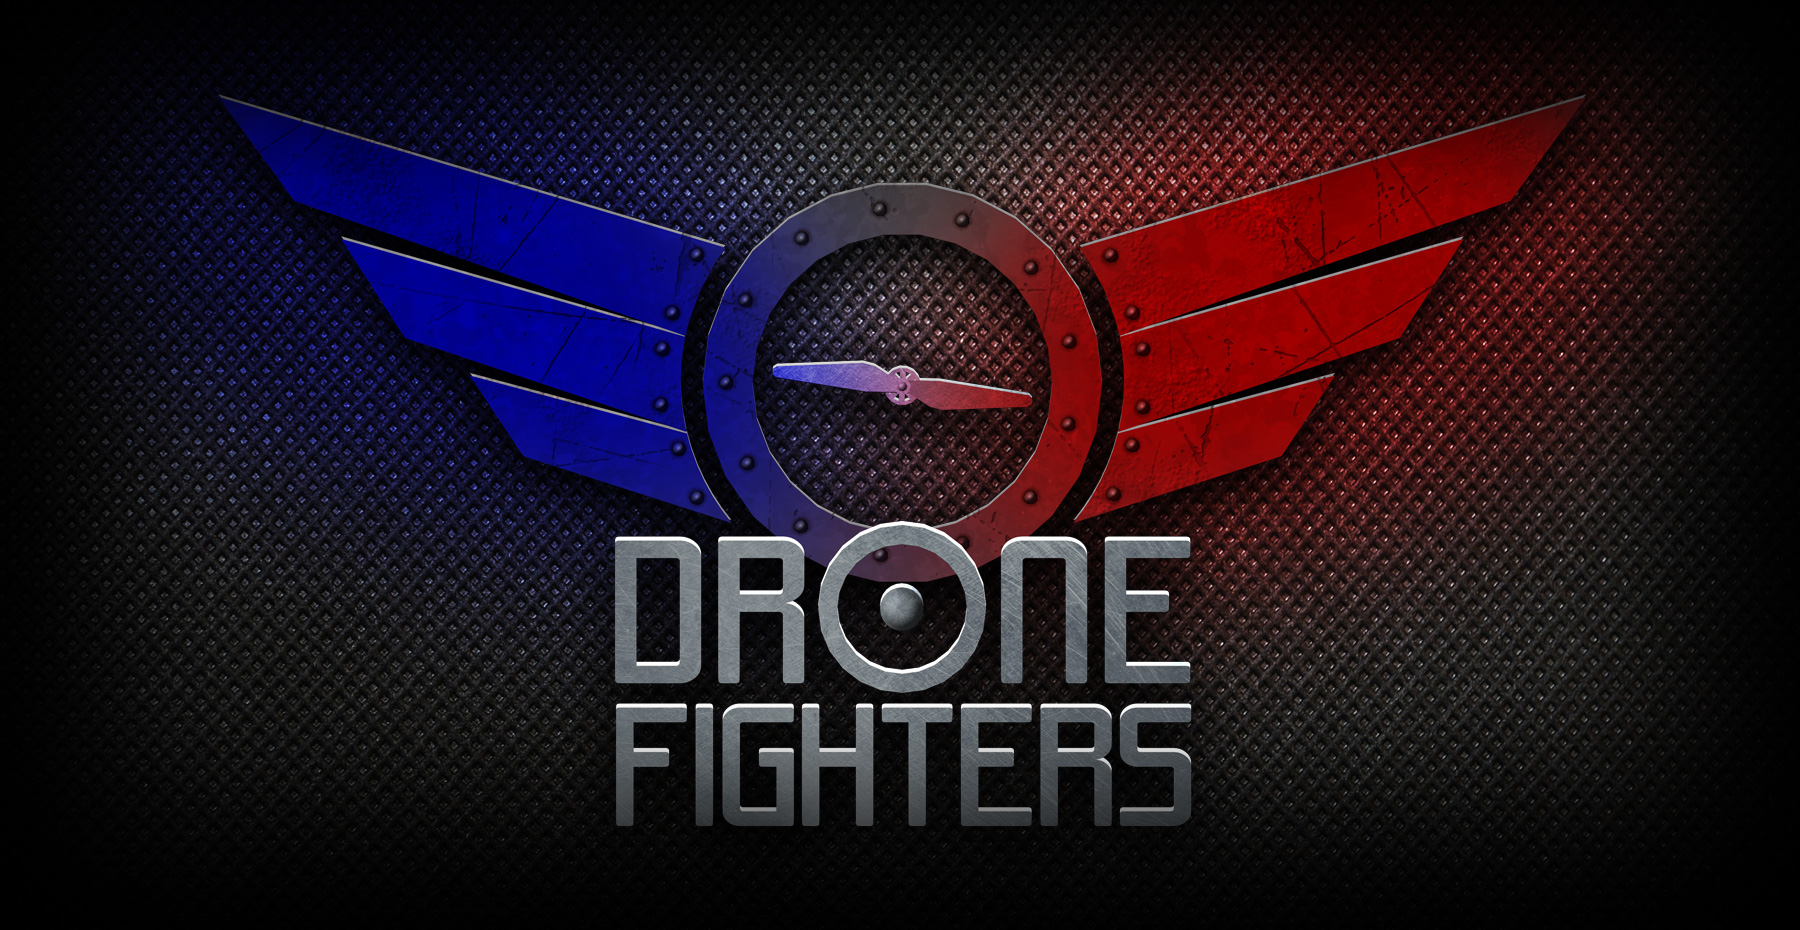 Drone Fighters VR